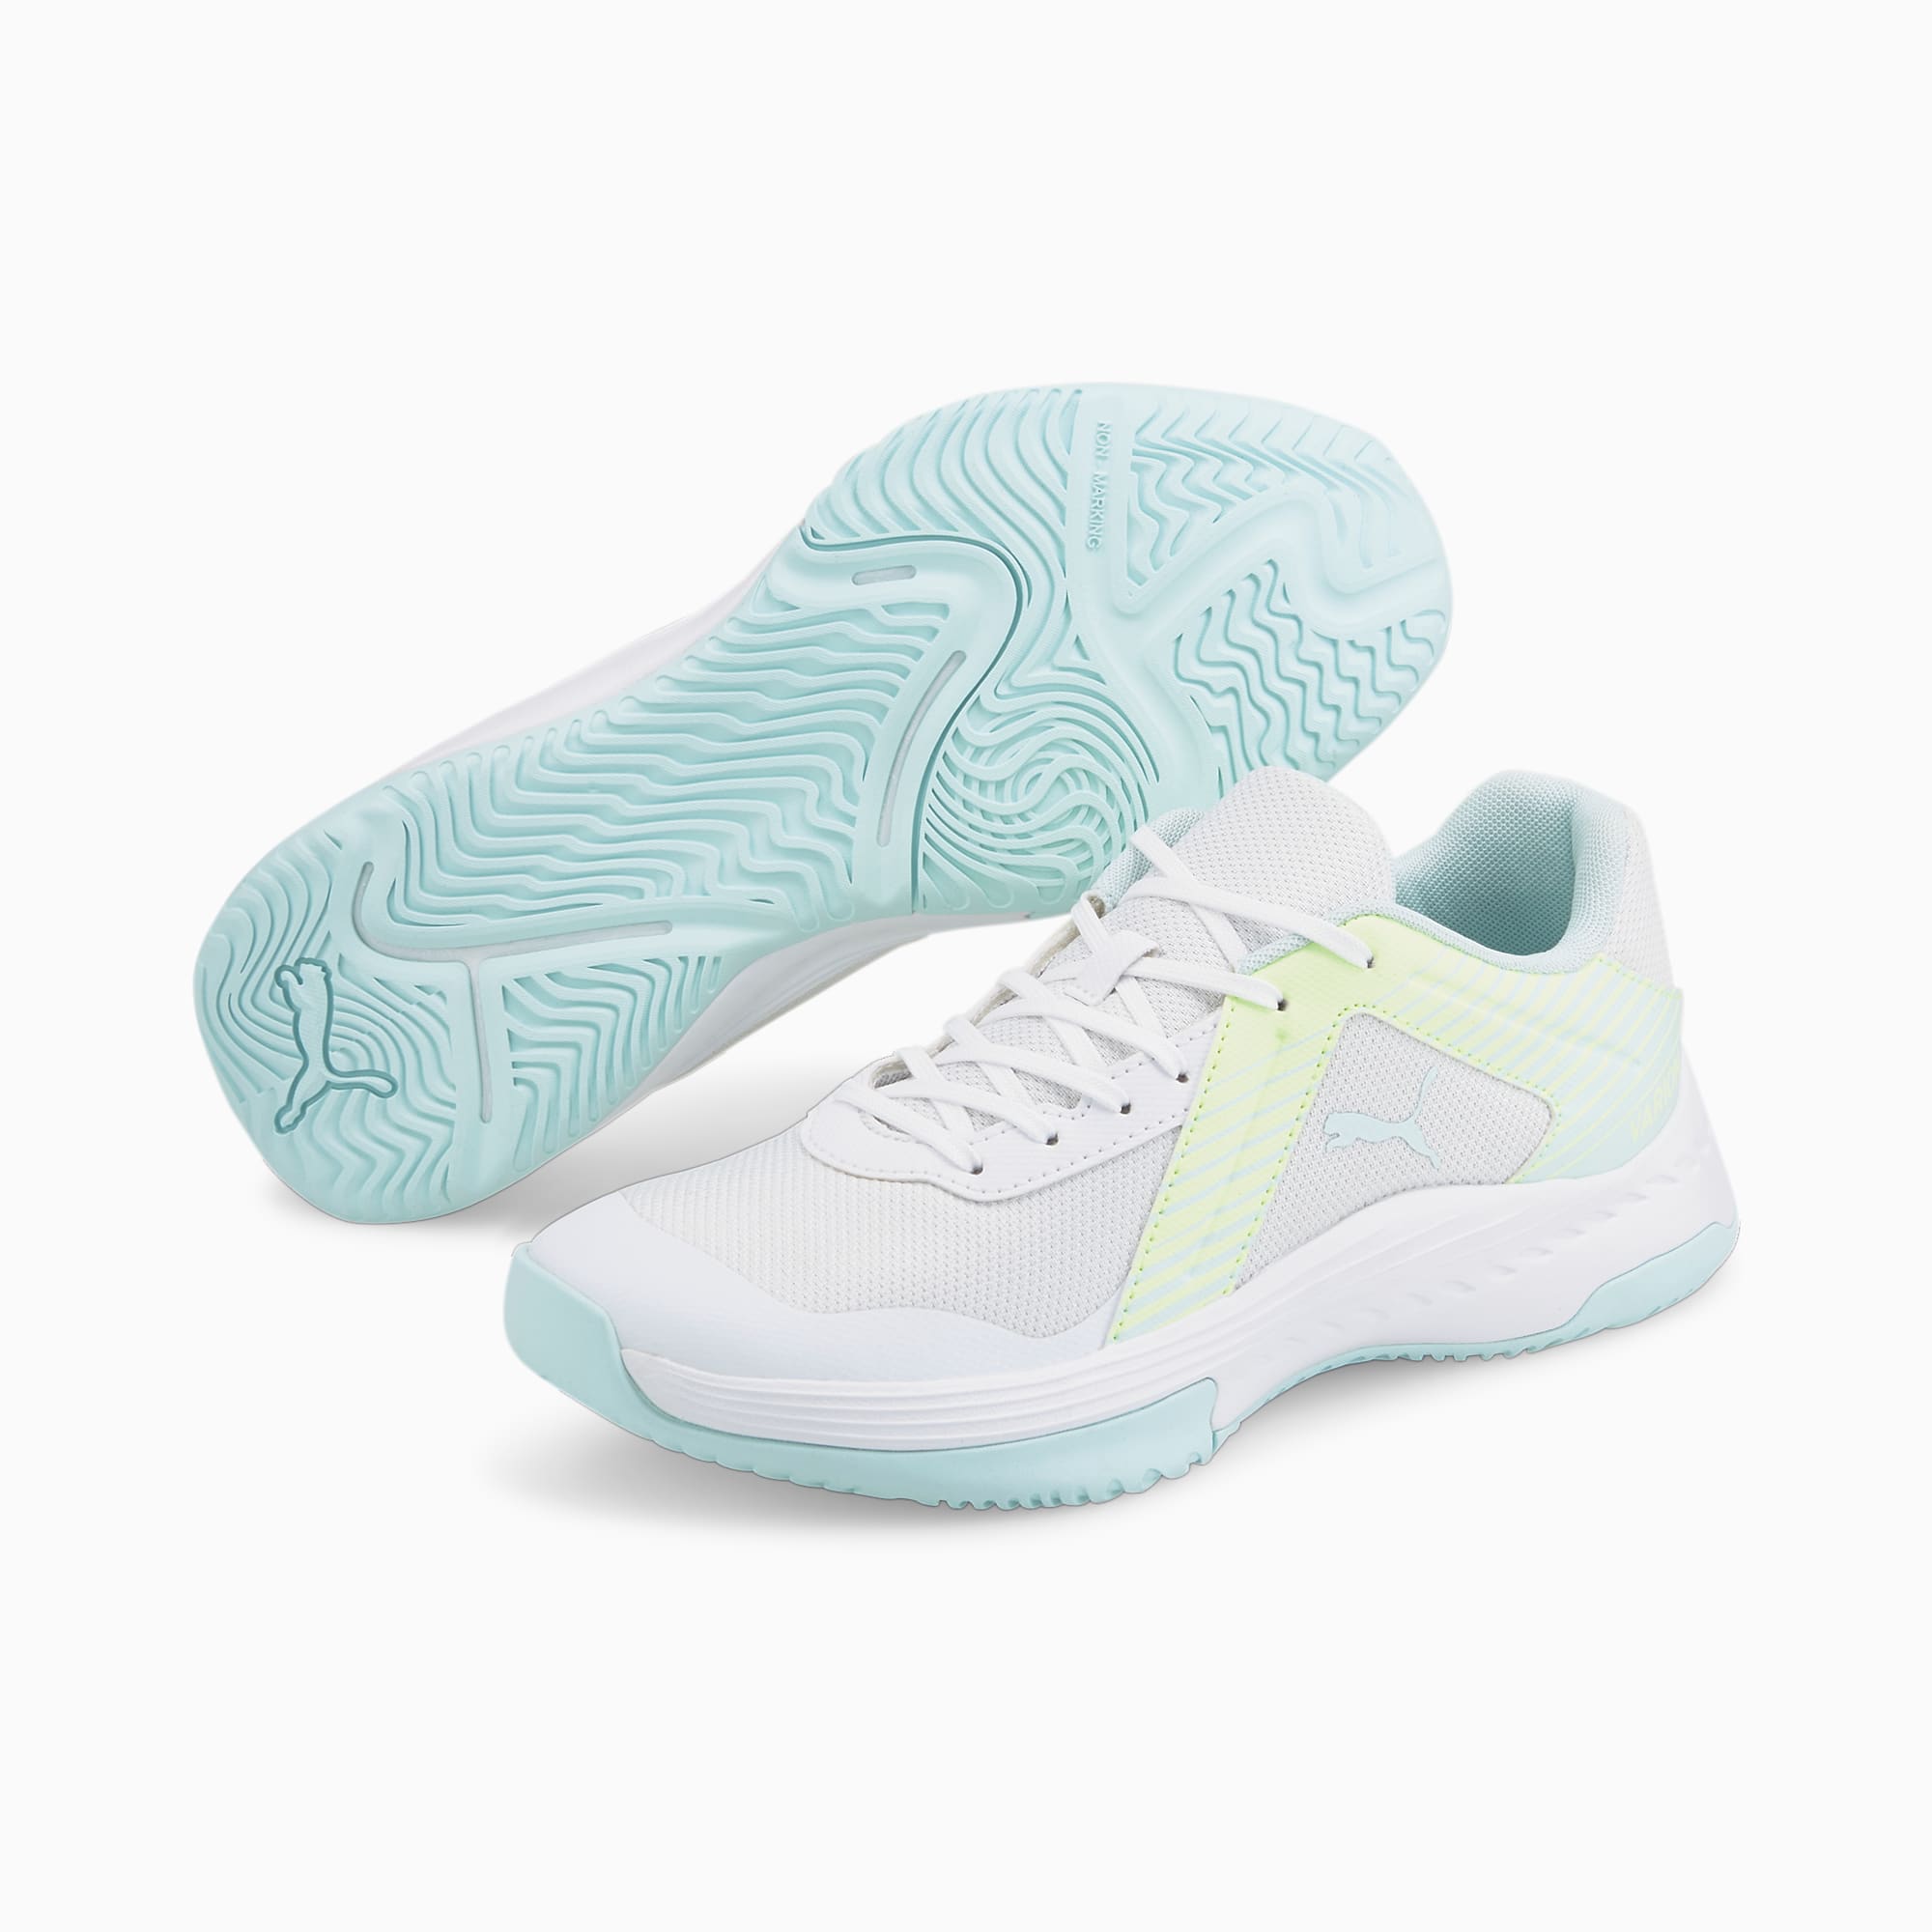 Women's PUMA Varion Indoor Sports Shoe Sneakers, White/Nitro Blue/Fizzy Light, Size 36, Shoes